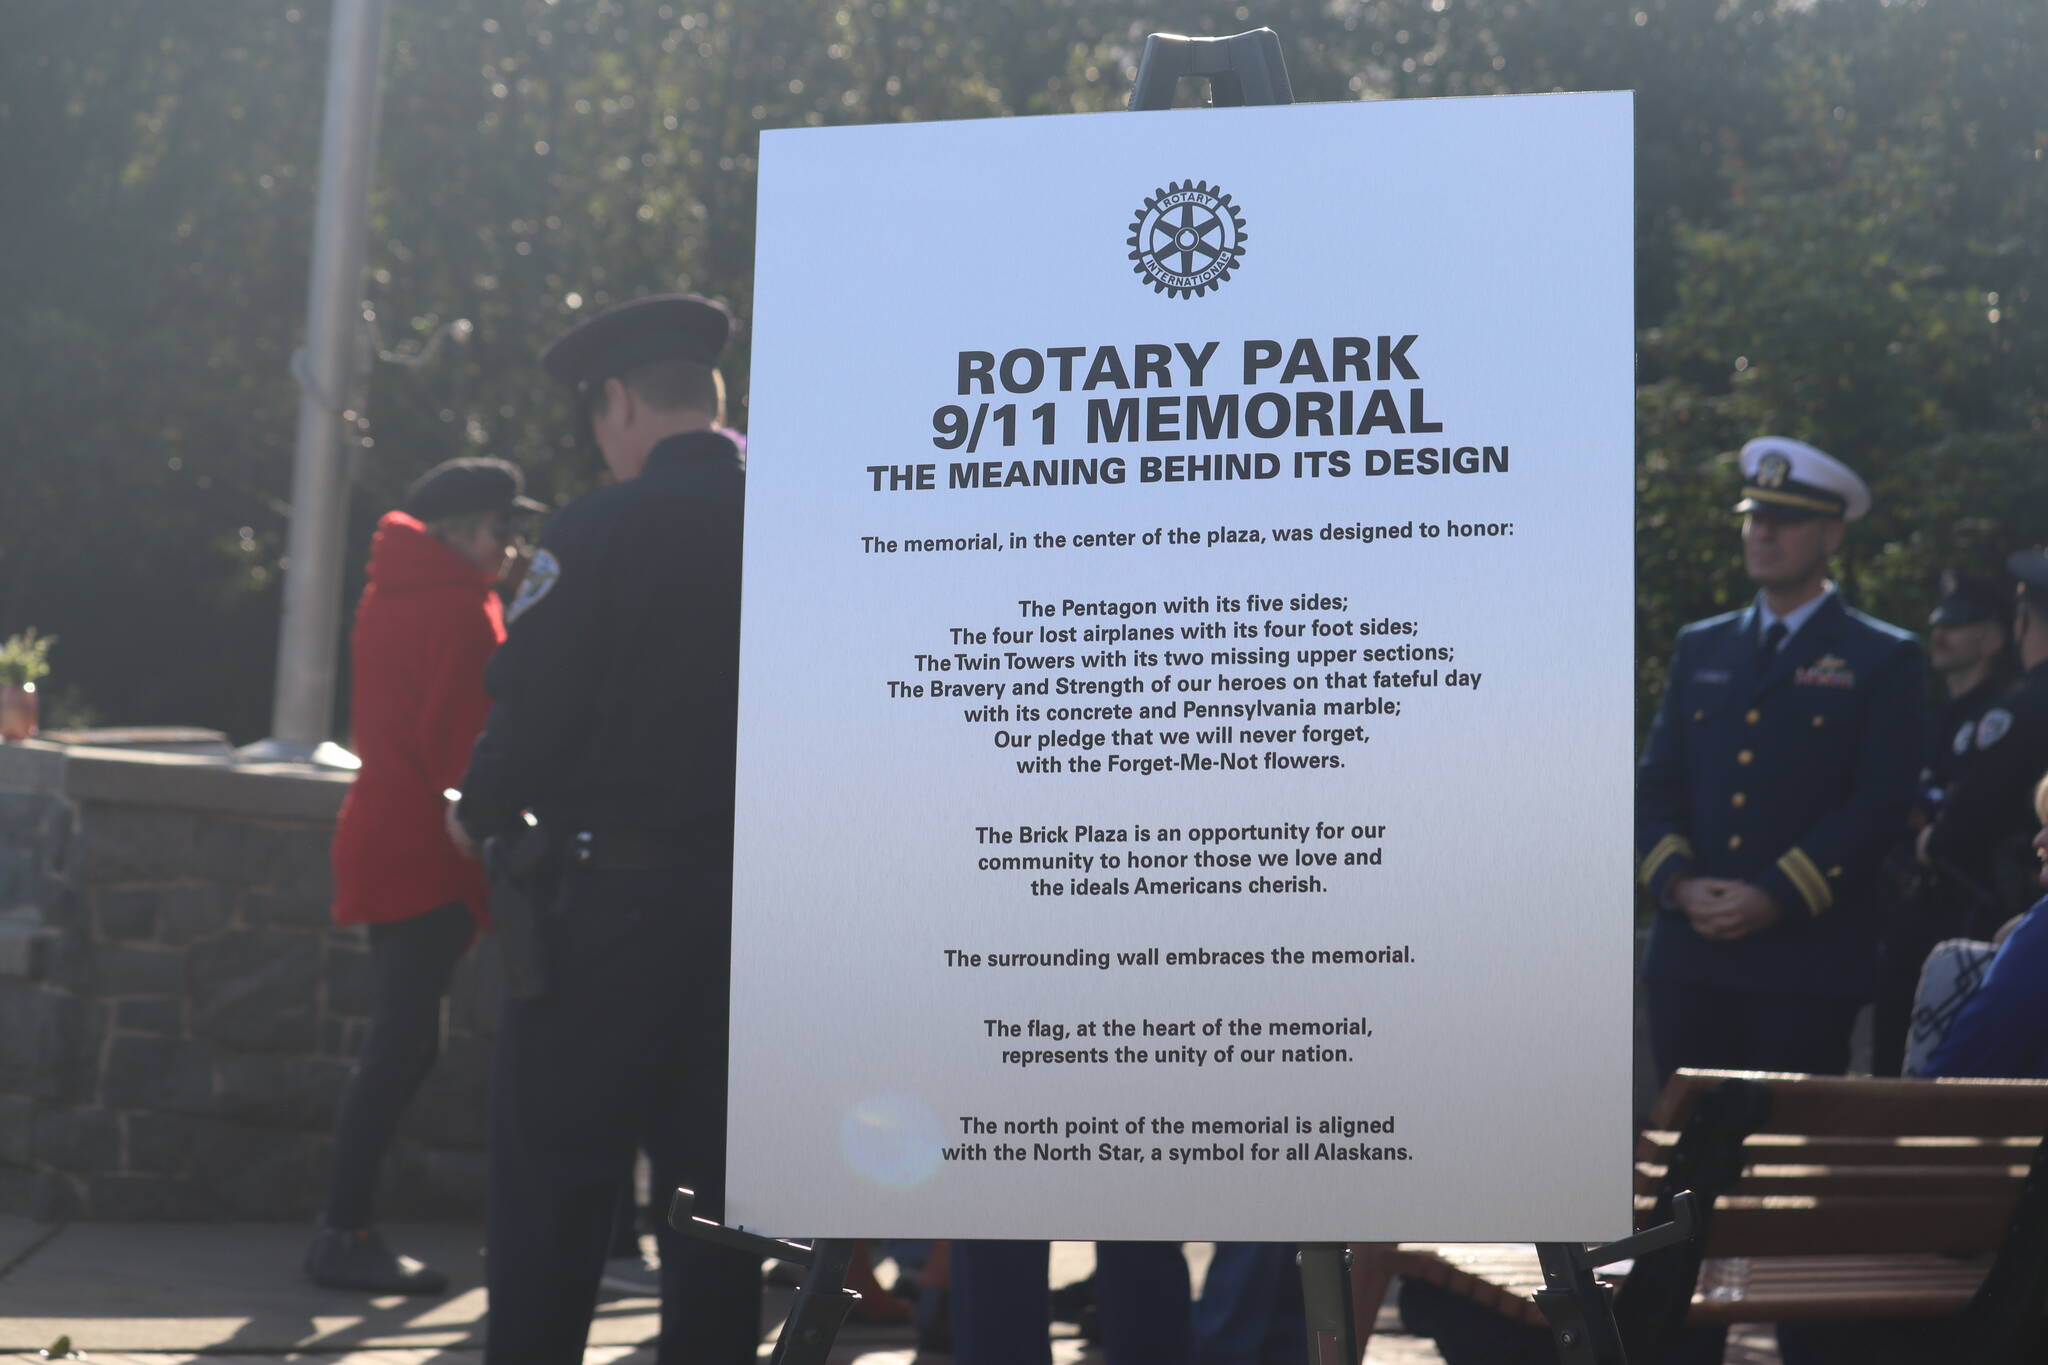 Juneau Glacier Valley Rotary Club hosted a ceremony Sunday morning to remember the events that took place on 9/11 by honoring Juneau’s first responders at the September 11th Memorial at Riverside Rotary Park. (Jonson Kuhn / Juneau Empire)